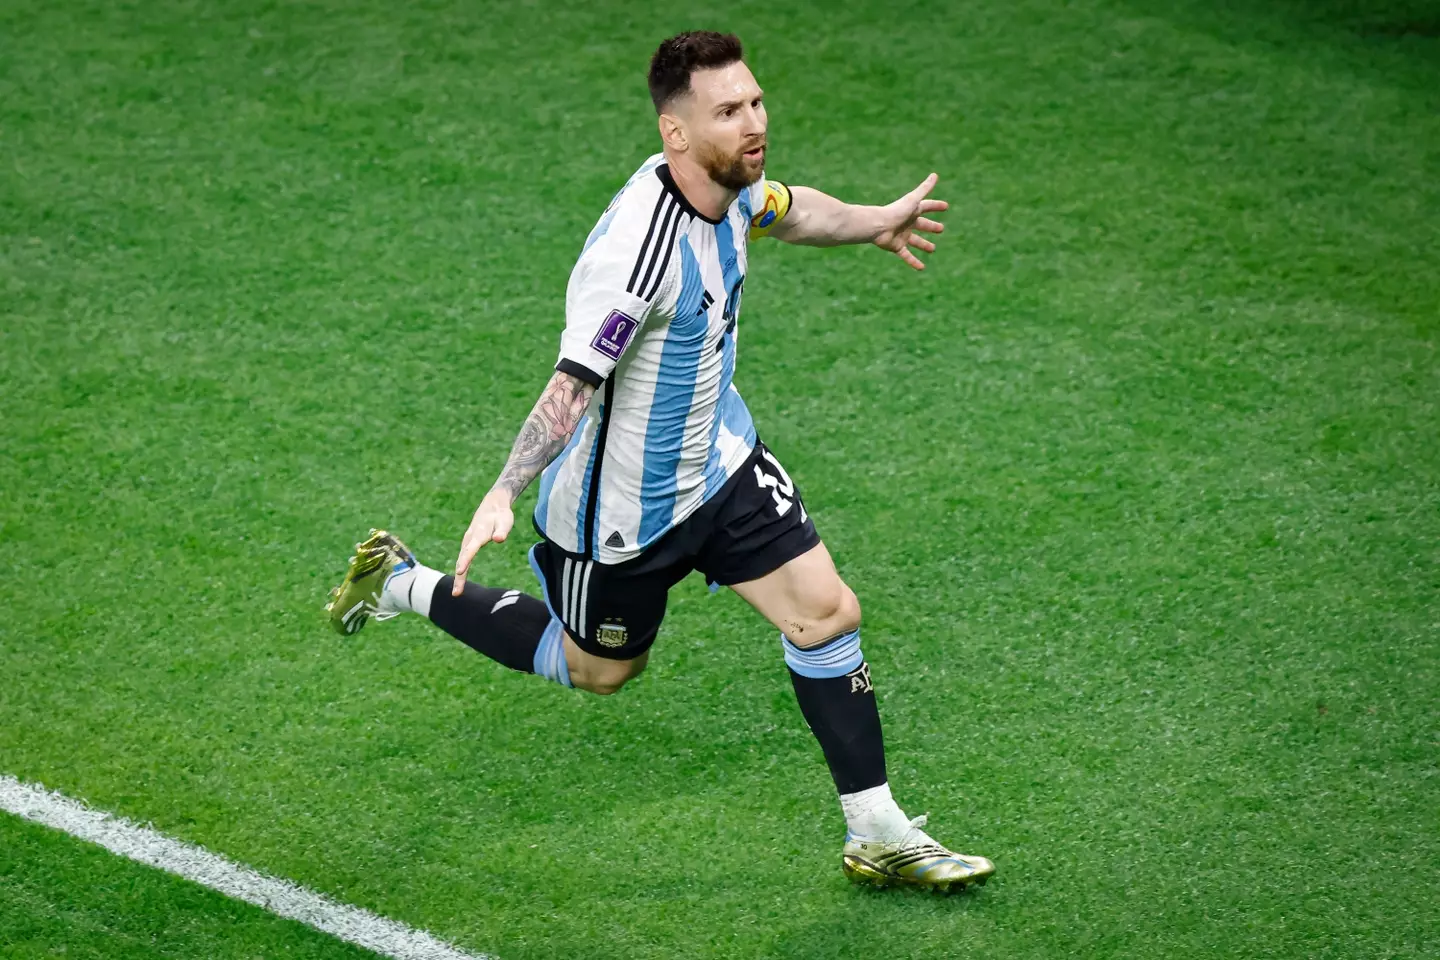 Messi after opening the scoring against Australia. (Image